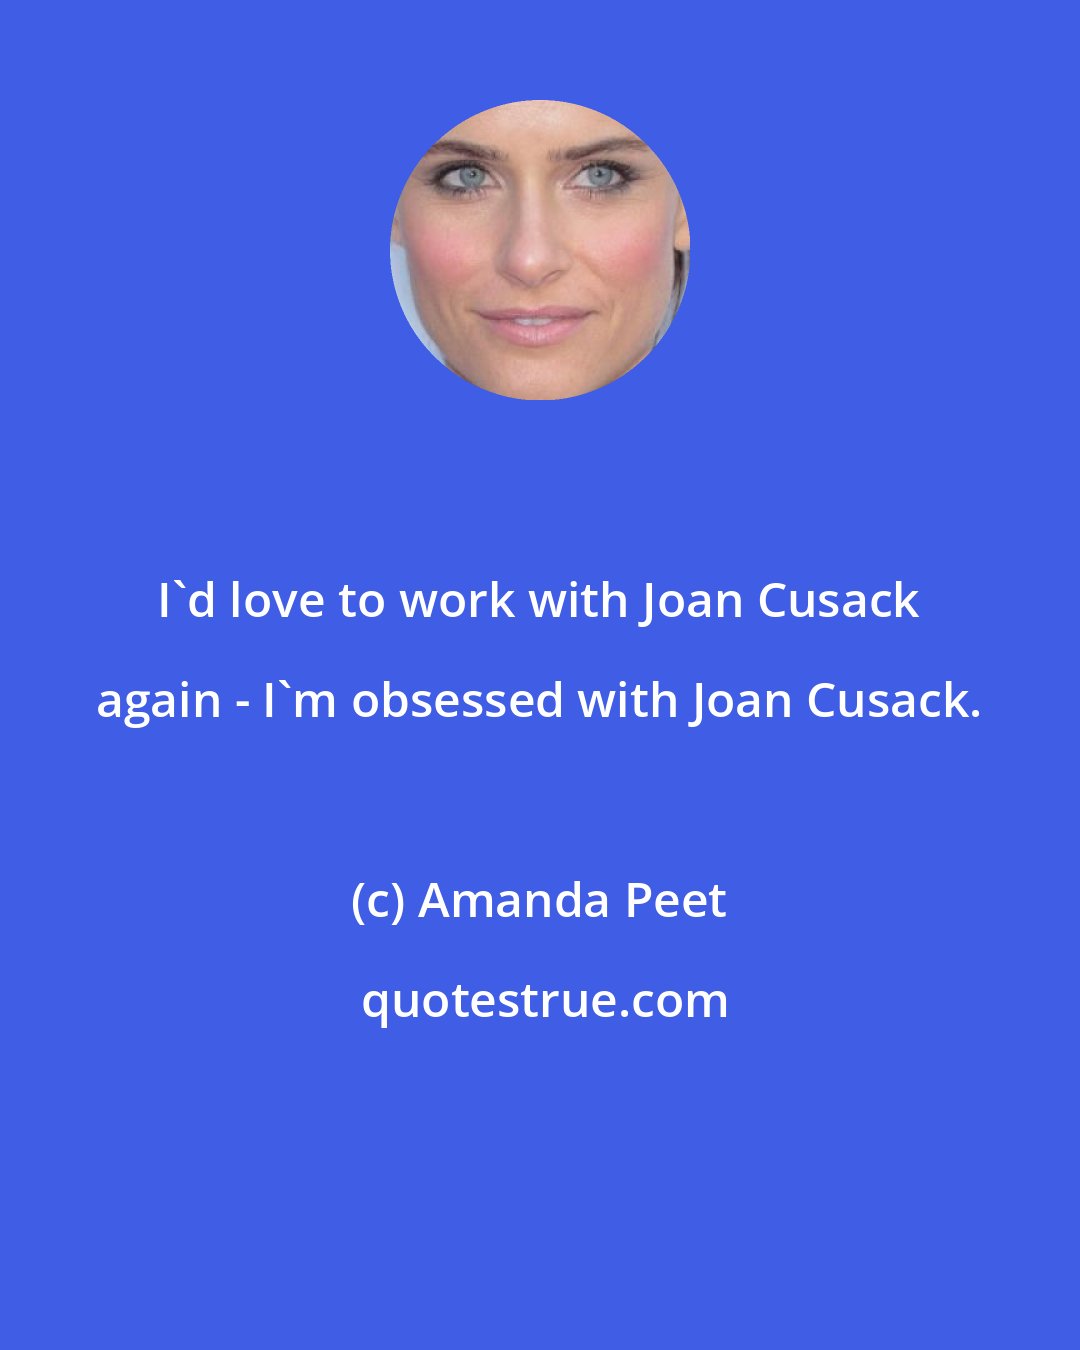 Amanda Peet: I'd love to work with Joan Cusack again - I'm obsessed with Joan Cusack.